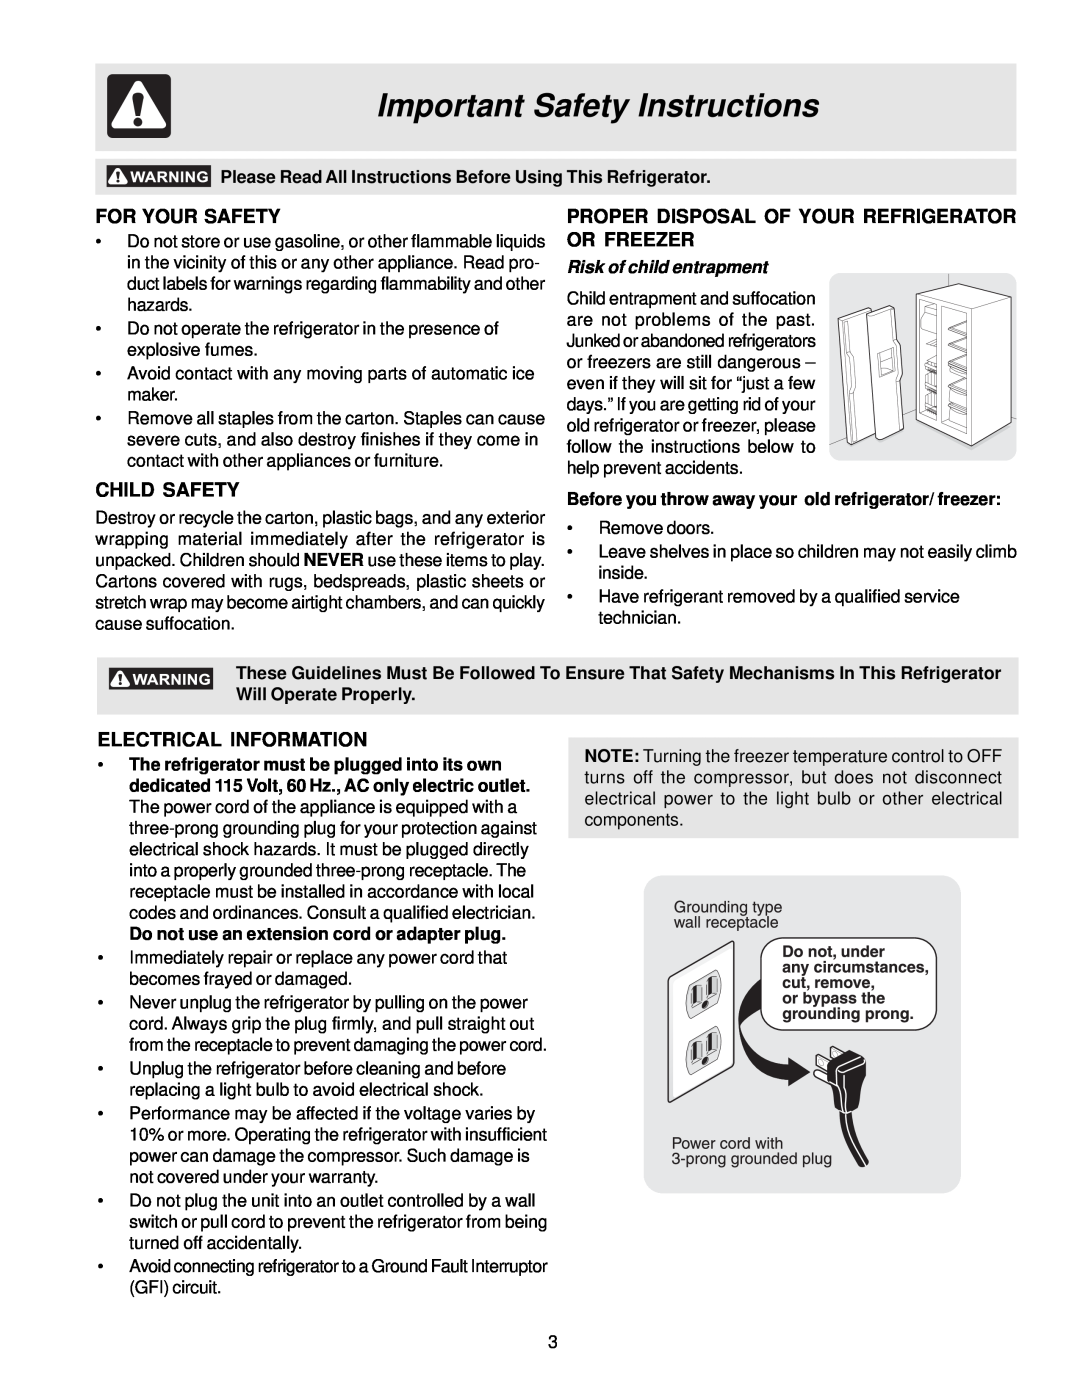 Frigidaire FRS26R4AQ0 Important Safety Instructions, For Your Safety, Proper Disposal Of Your Refrigerator Or Freezer 